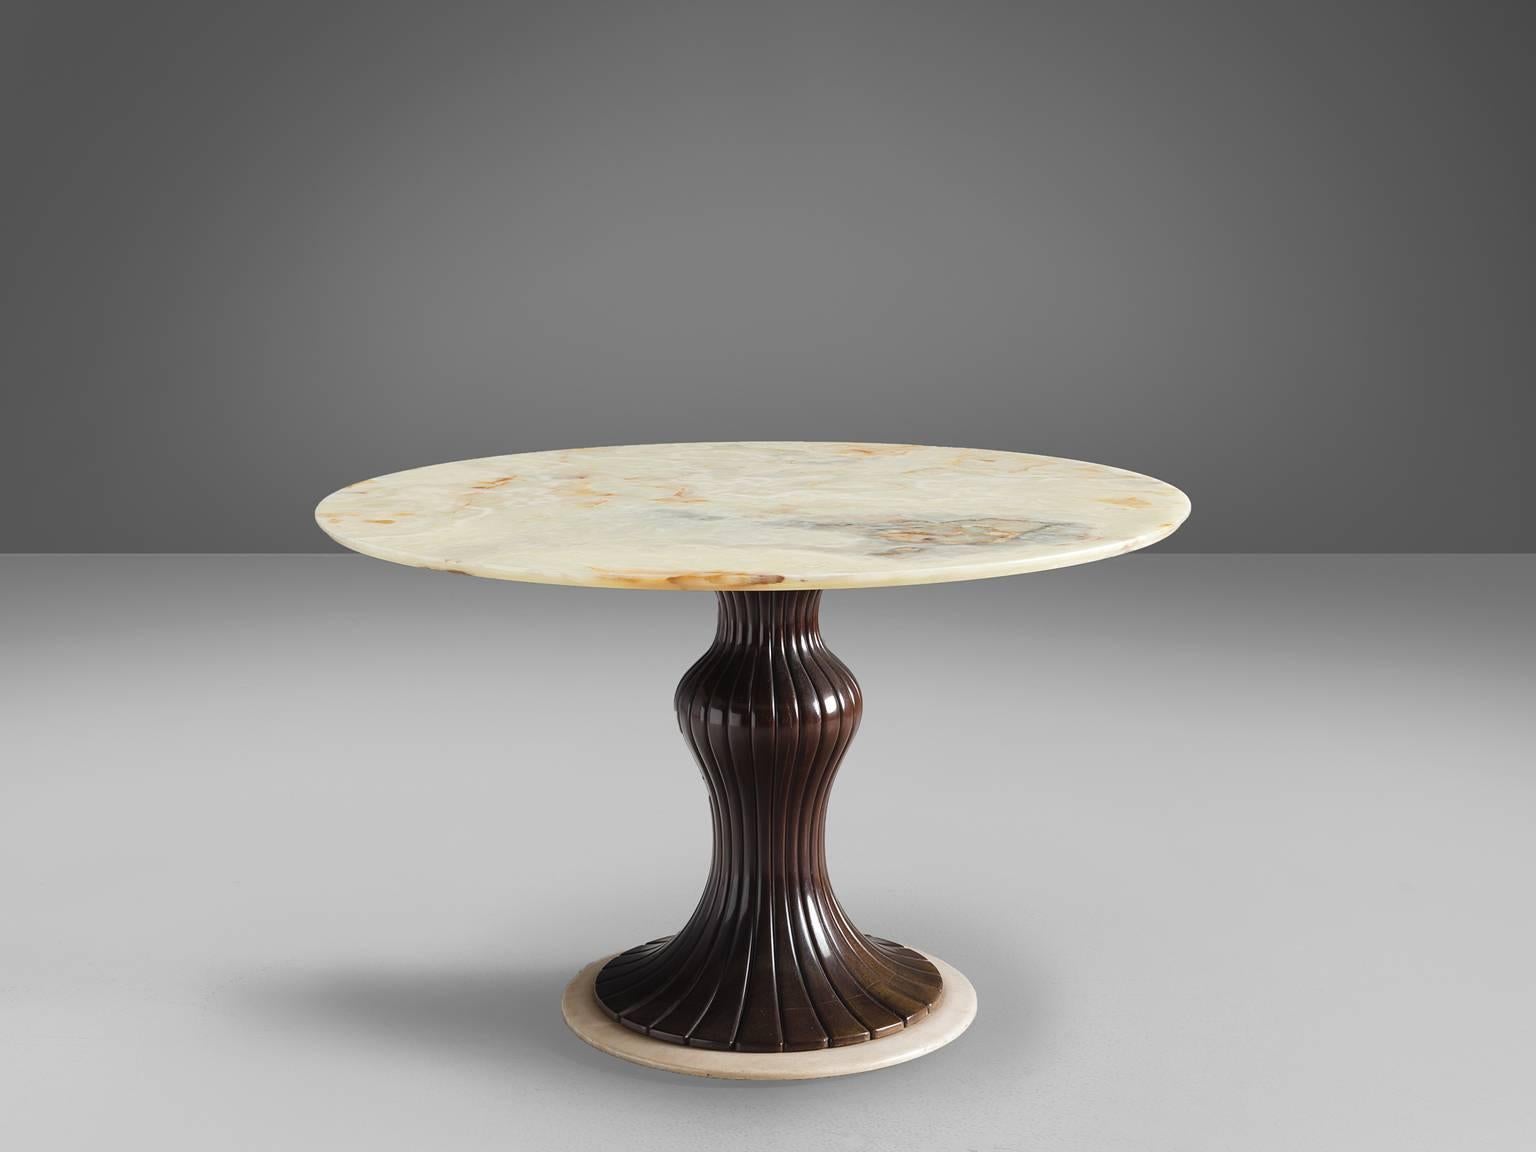 Osvaldo Borsani, dining table, marble, mahogany, Italy, 1950s. 

This distinctive center table is made in the 1950s and holds a wooden decorated shaft. The main feature of this table is the almost translucent white marble top. The yellow and grey